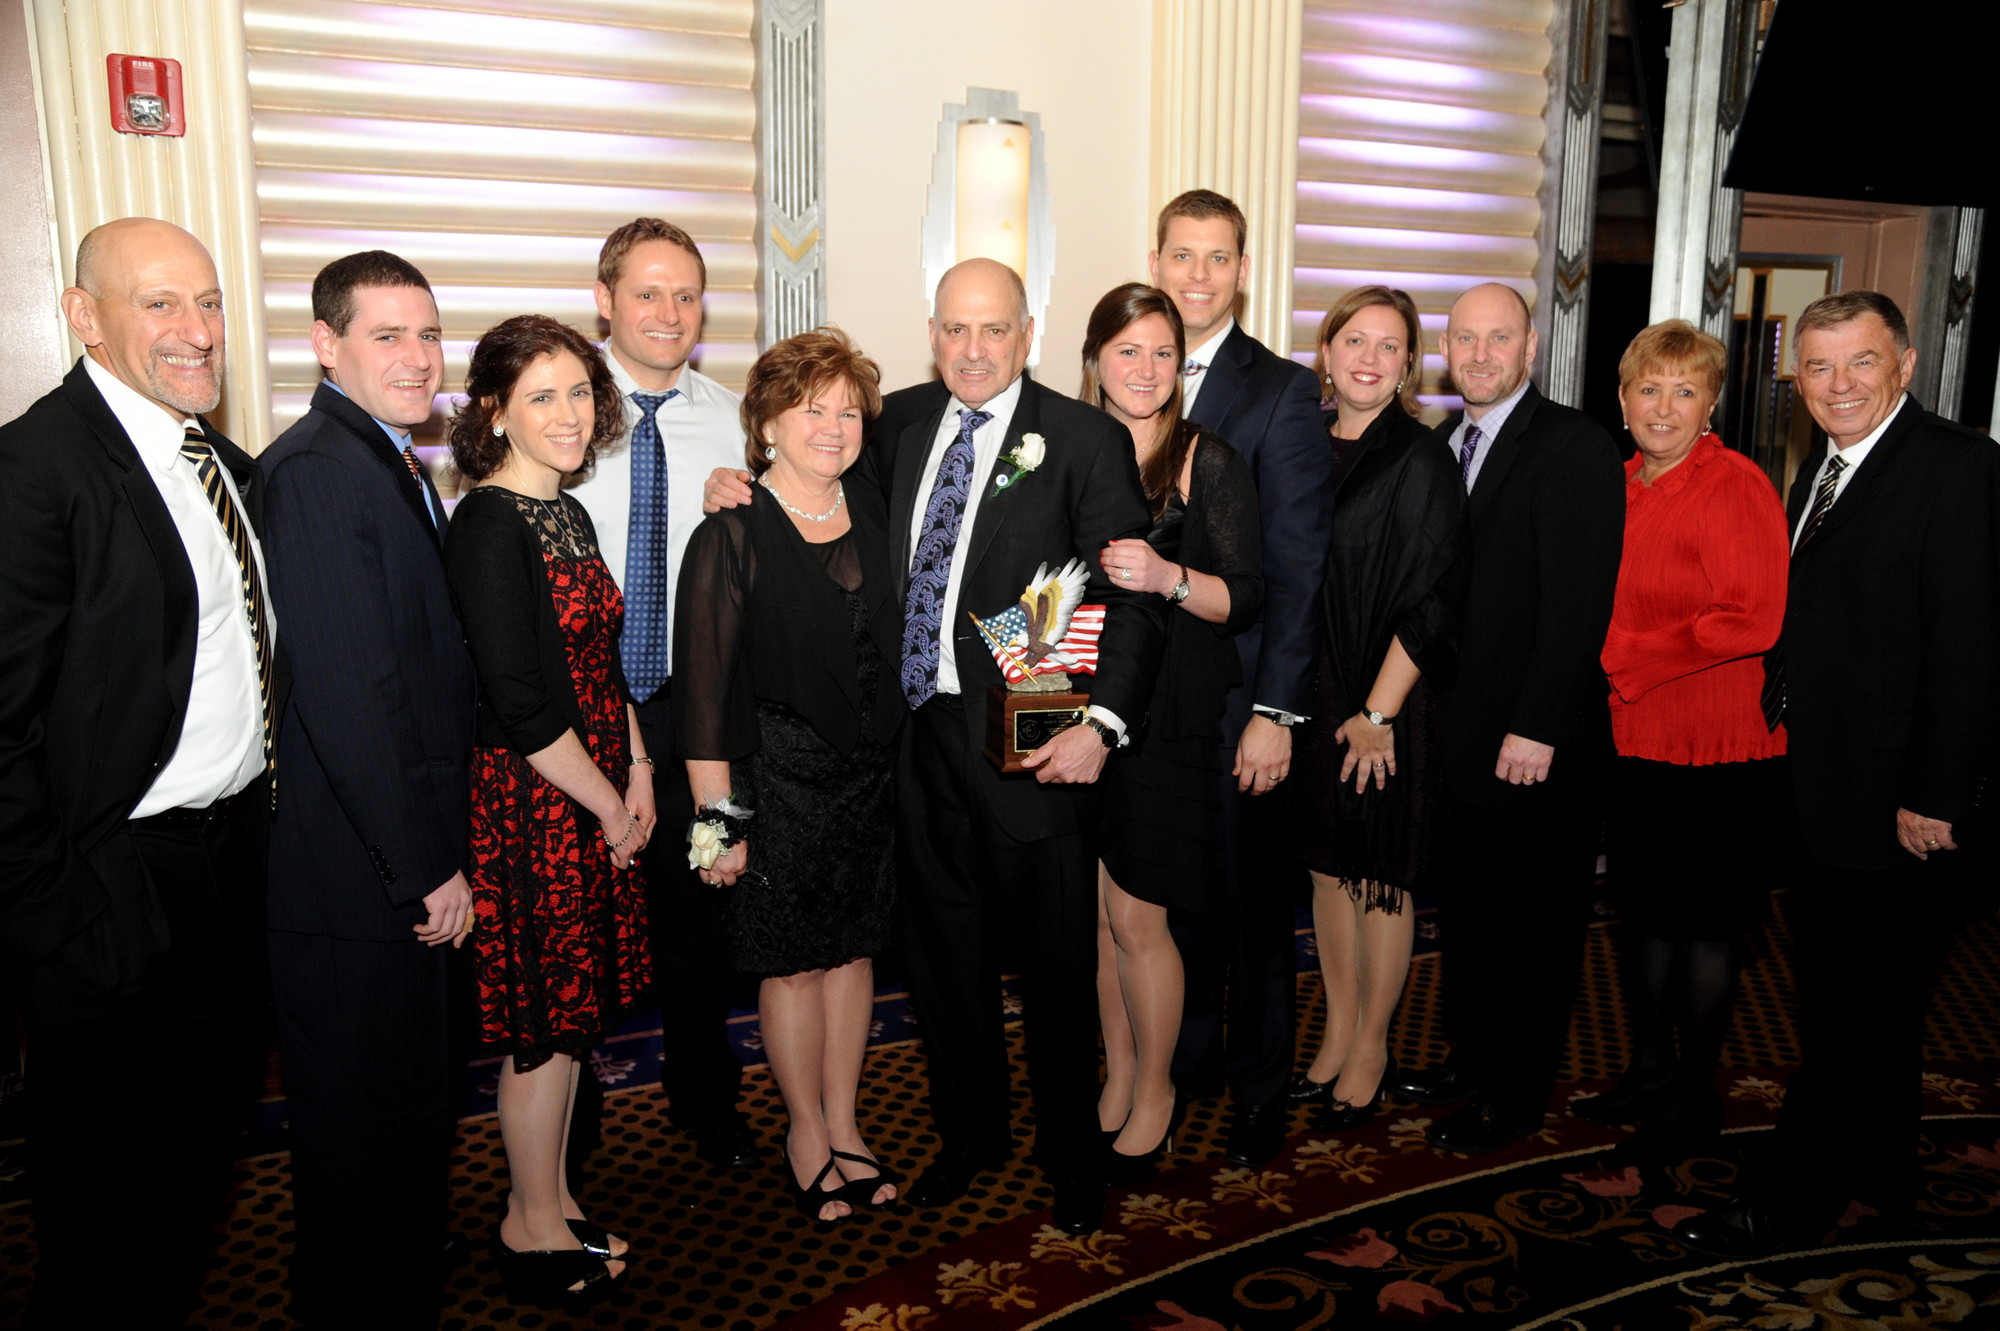 Alan Hodish, sixth from left, was honored as Man of the Year. He was joined to his right by his wife, Denise, and the rest of his family and friends.